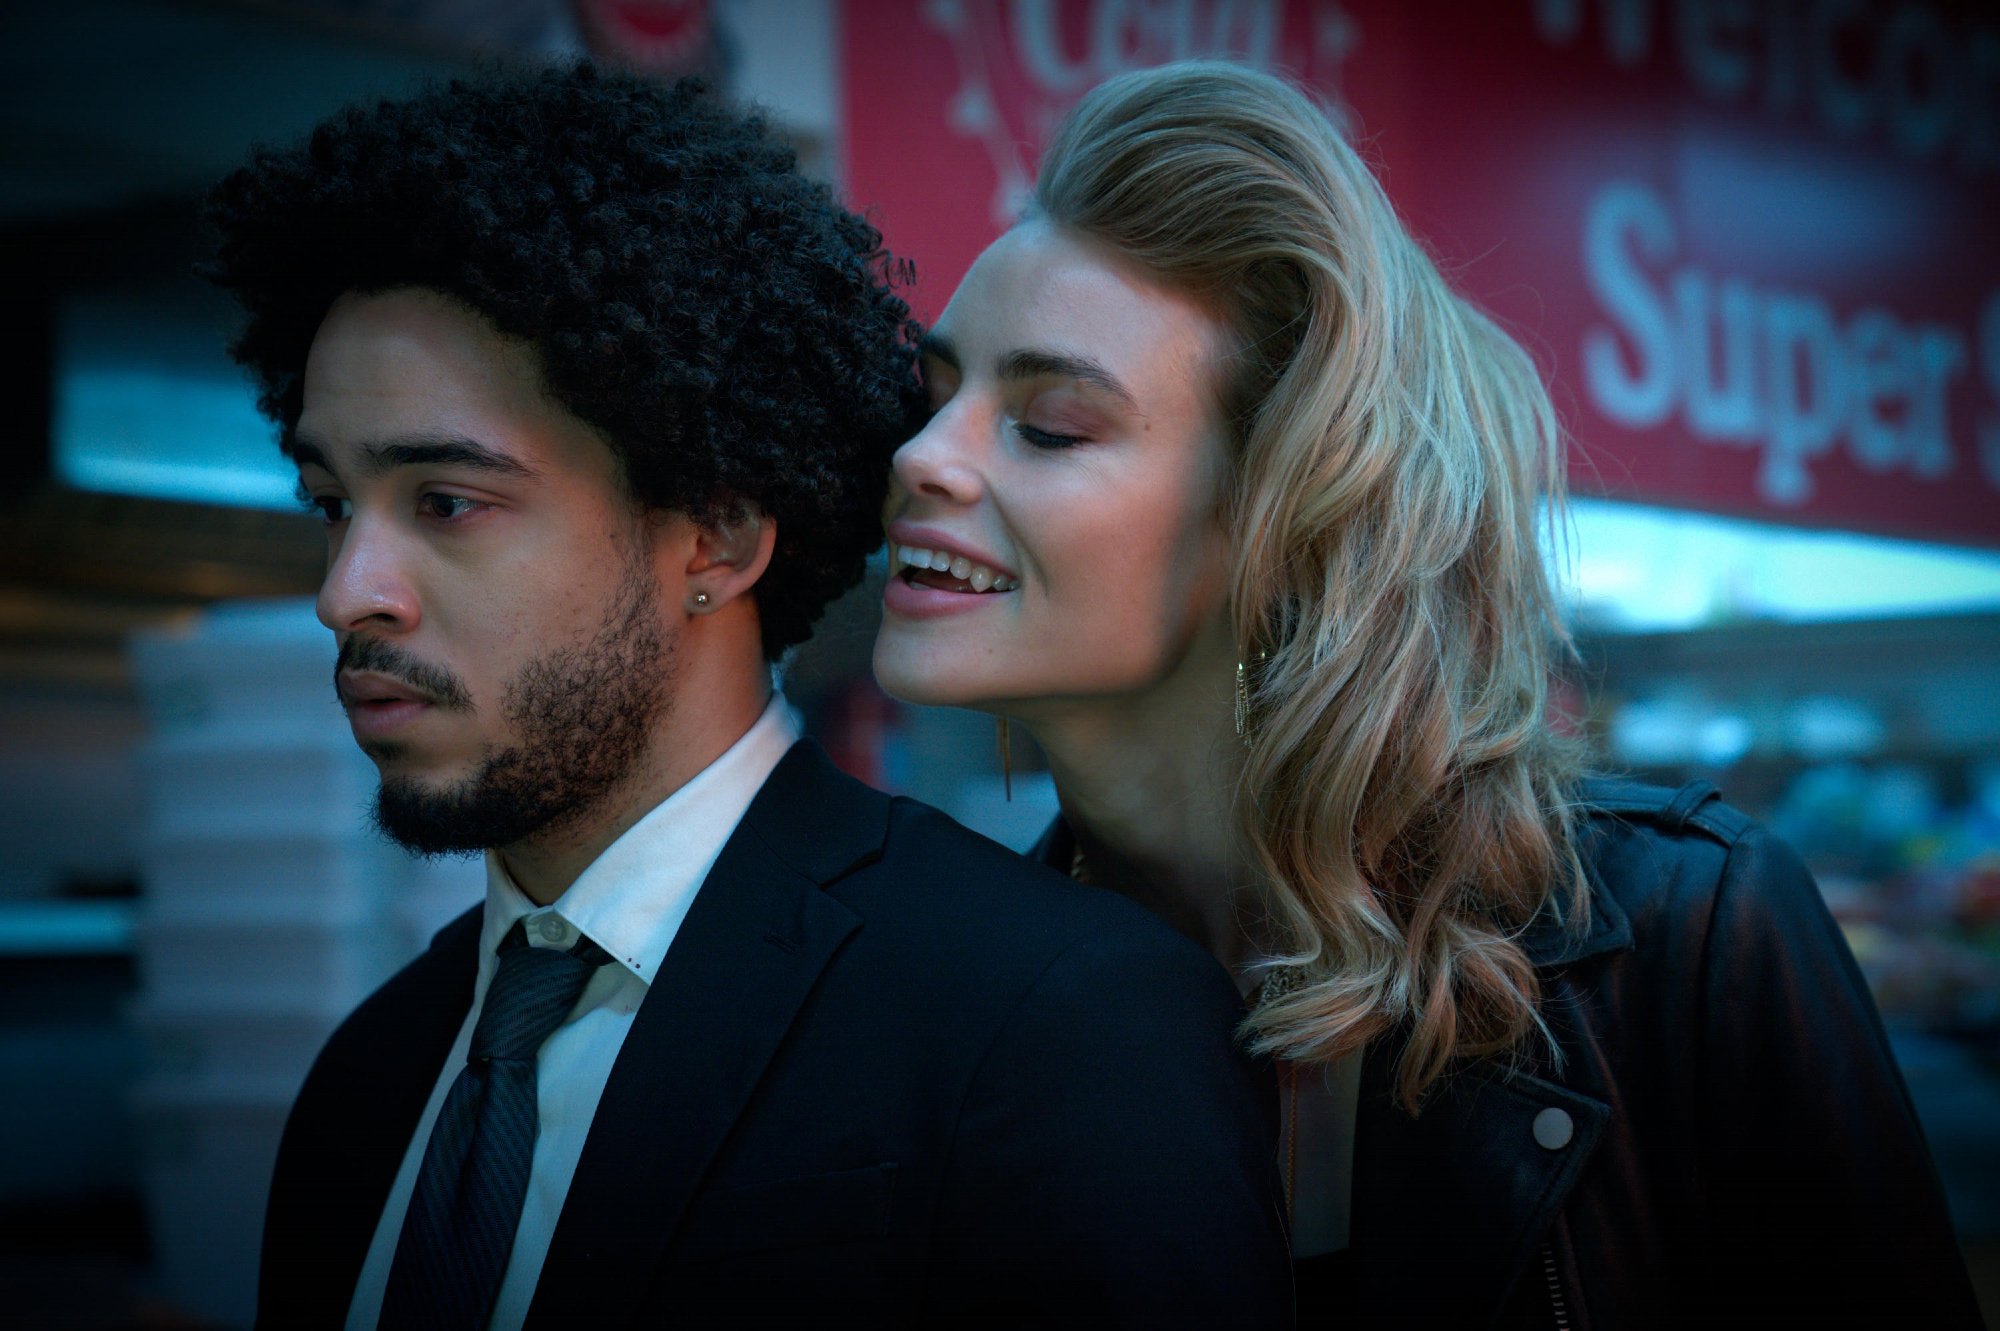 'Night Teeth' stars Jorge Lengeborg Jr. as Benny and Lucy Fry as Zoe with Zoe leaning over Benny's shoulder